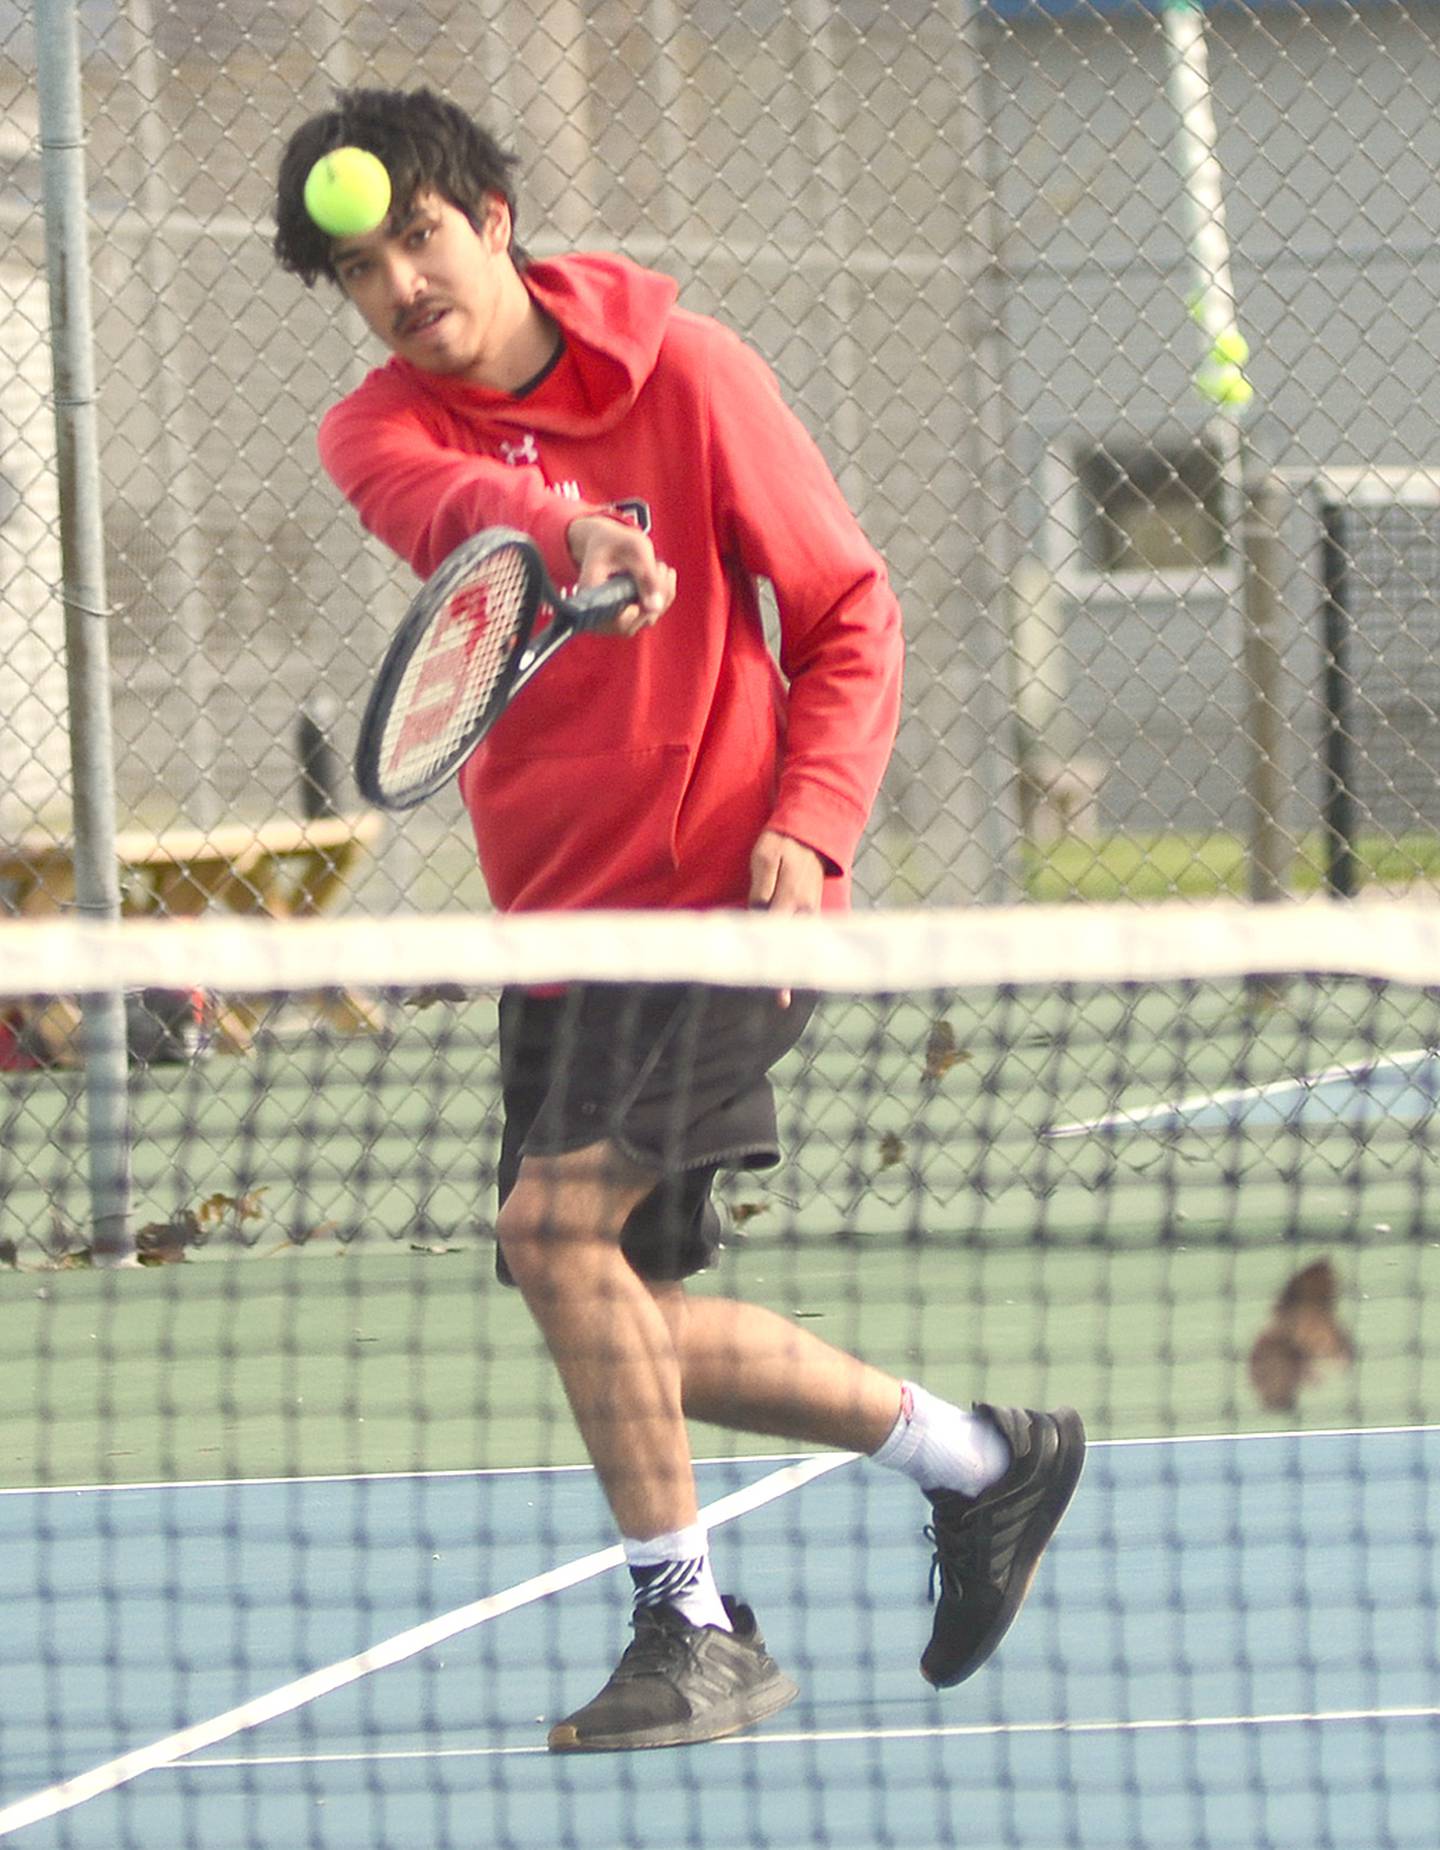 Ben Hill of Creston concentrates on a baseline return during his 8-6 singles win against Clarinda Monday. Hill and Damion Meyer were also doubles winners in the team's 6-3 dual victory.